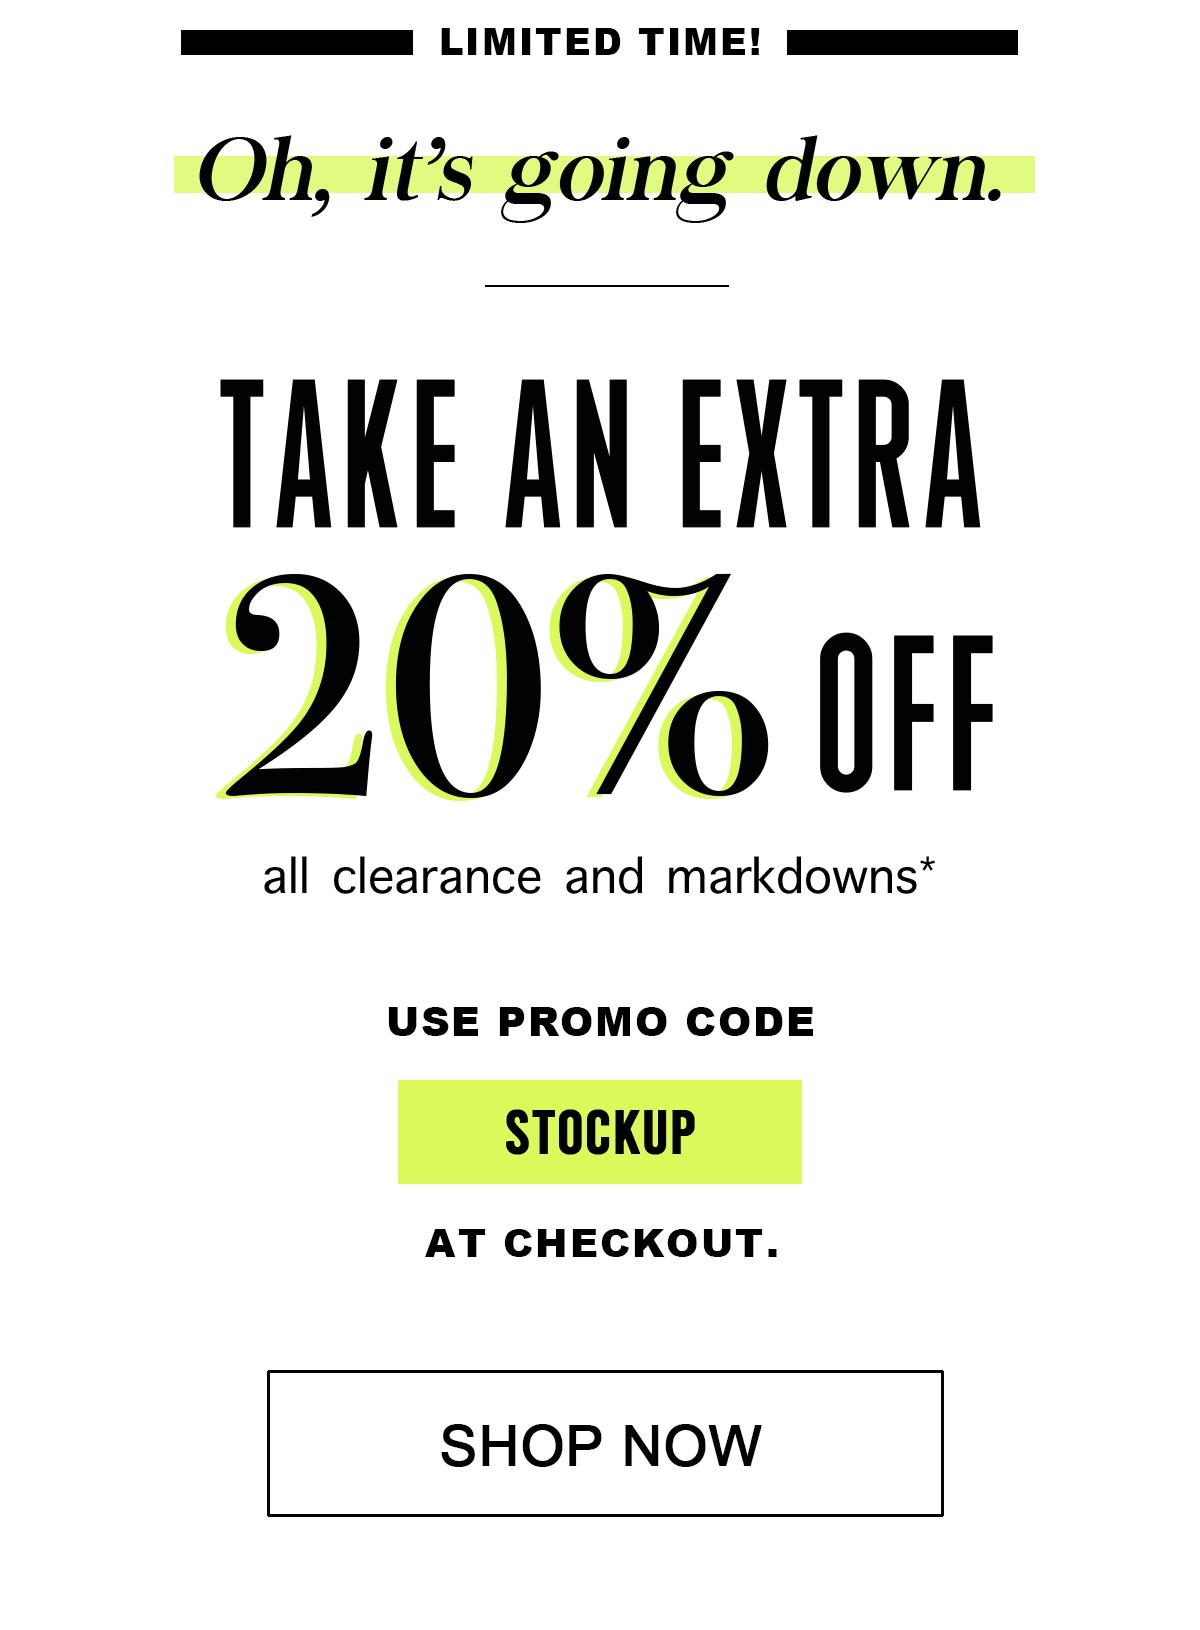 Limited time!  Oh, it's going down.  Take an Extra 20% Off all clearance and markdowns*  Use Promo Code  STOCKUP At Checkout. Shop Now